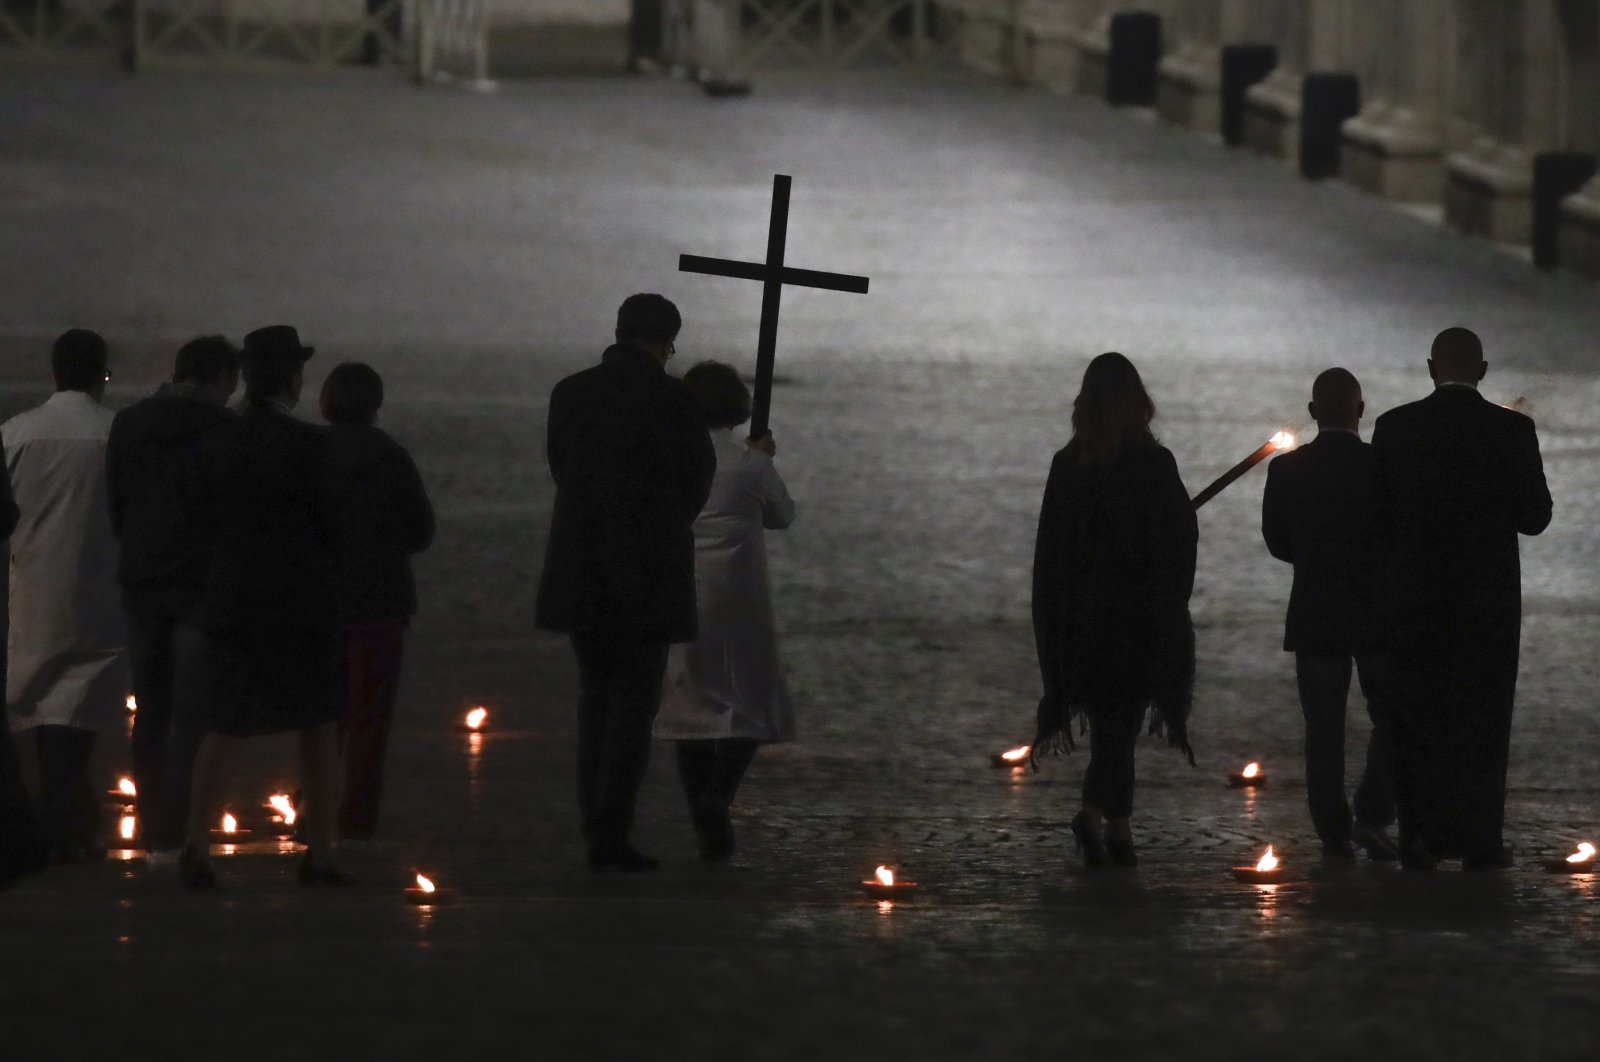 A woman holds the cross during the Via Crucis – or Way of the Cross – ceremony in St. Peter's Square, empty of the faithful following Italy's ban on gatherings to contain the coronavirus contagion, at the Vatican, April 10, 2020. (AP Photo)